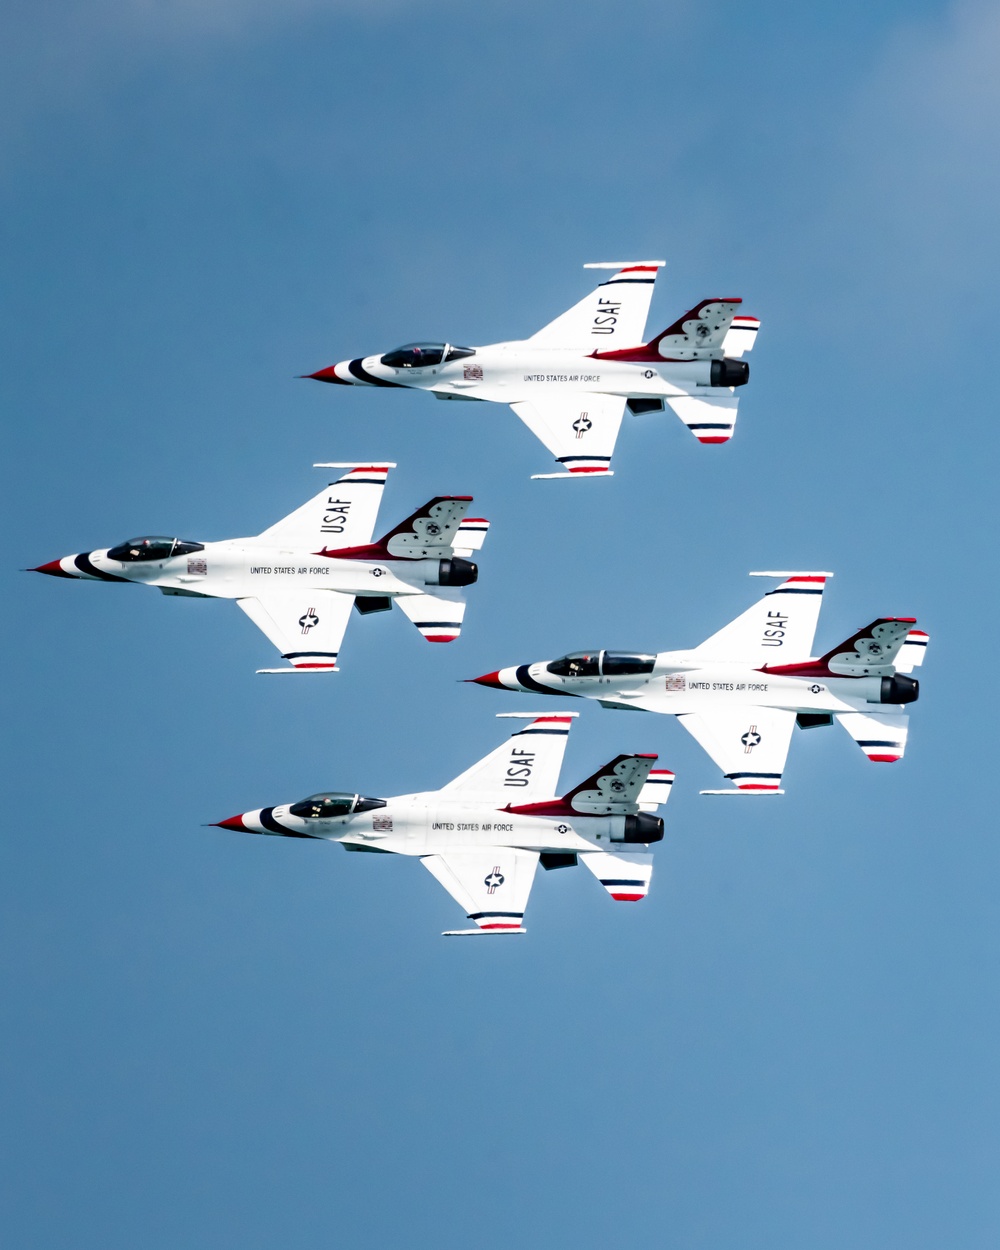 DVIDS Images Thunderbirds kickoff 2021 Air Show season in Cocoa